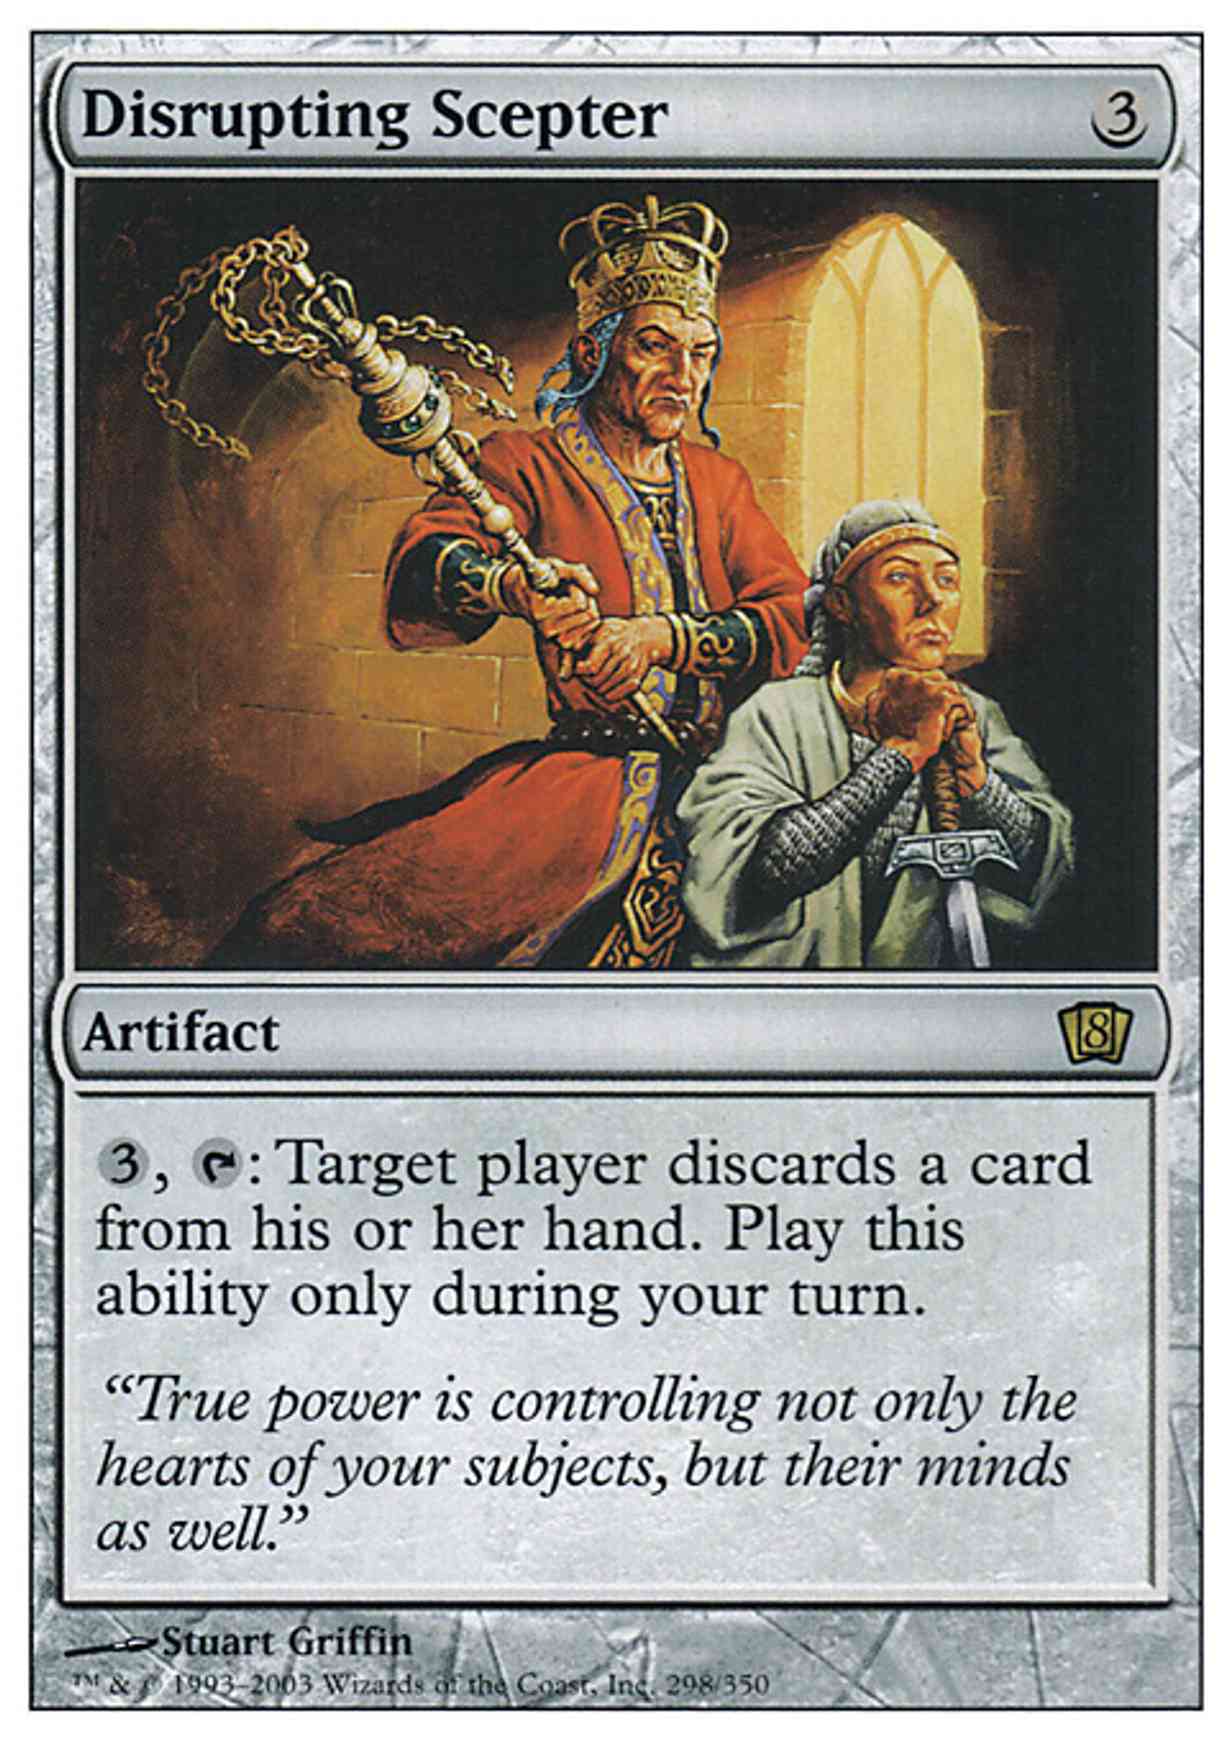 Disrupting Scepter magic card front